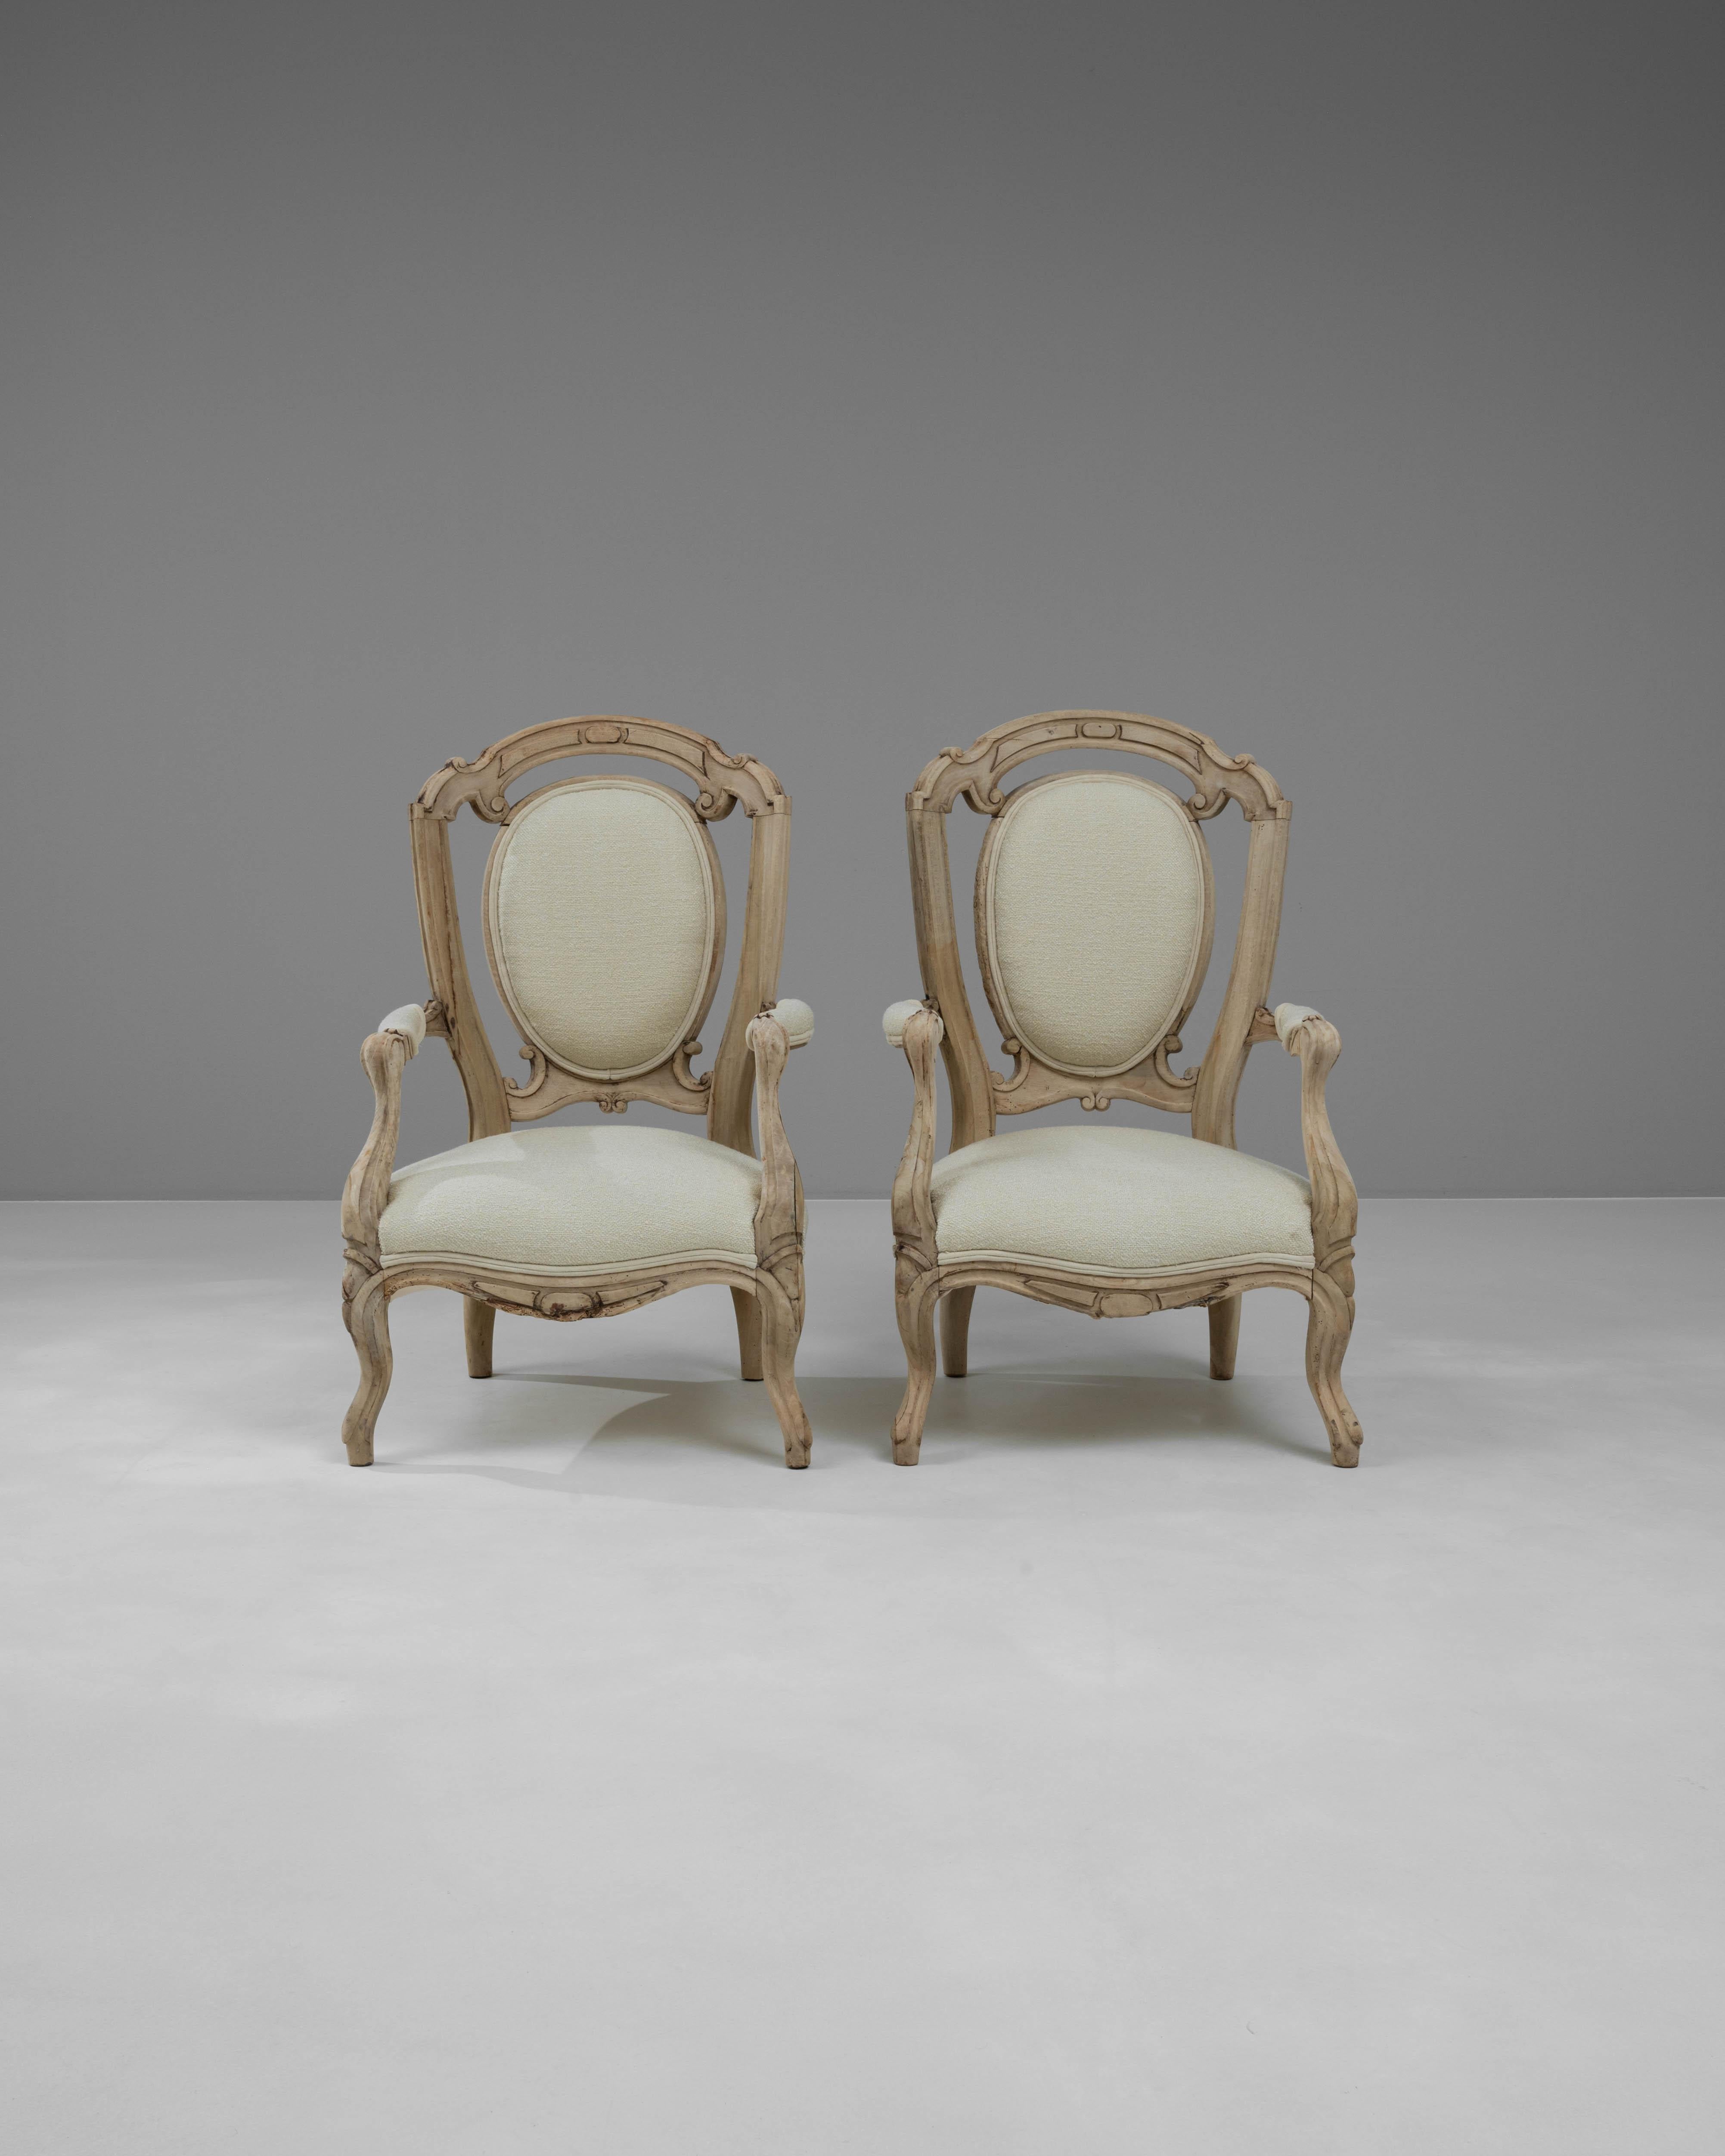 Upholstery 19th Century French Bleached Oak Upholstered Armchairs, a Pair For Sale